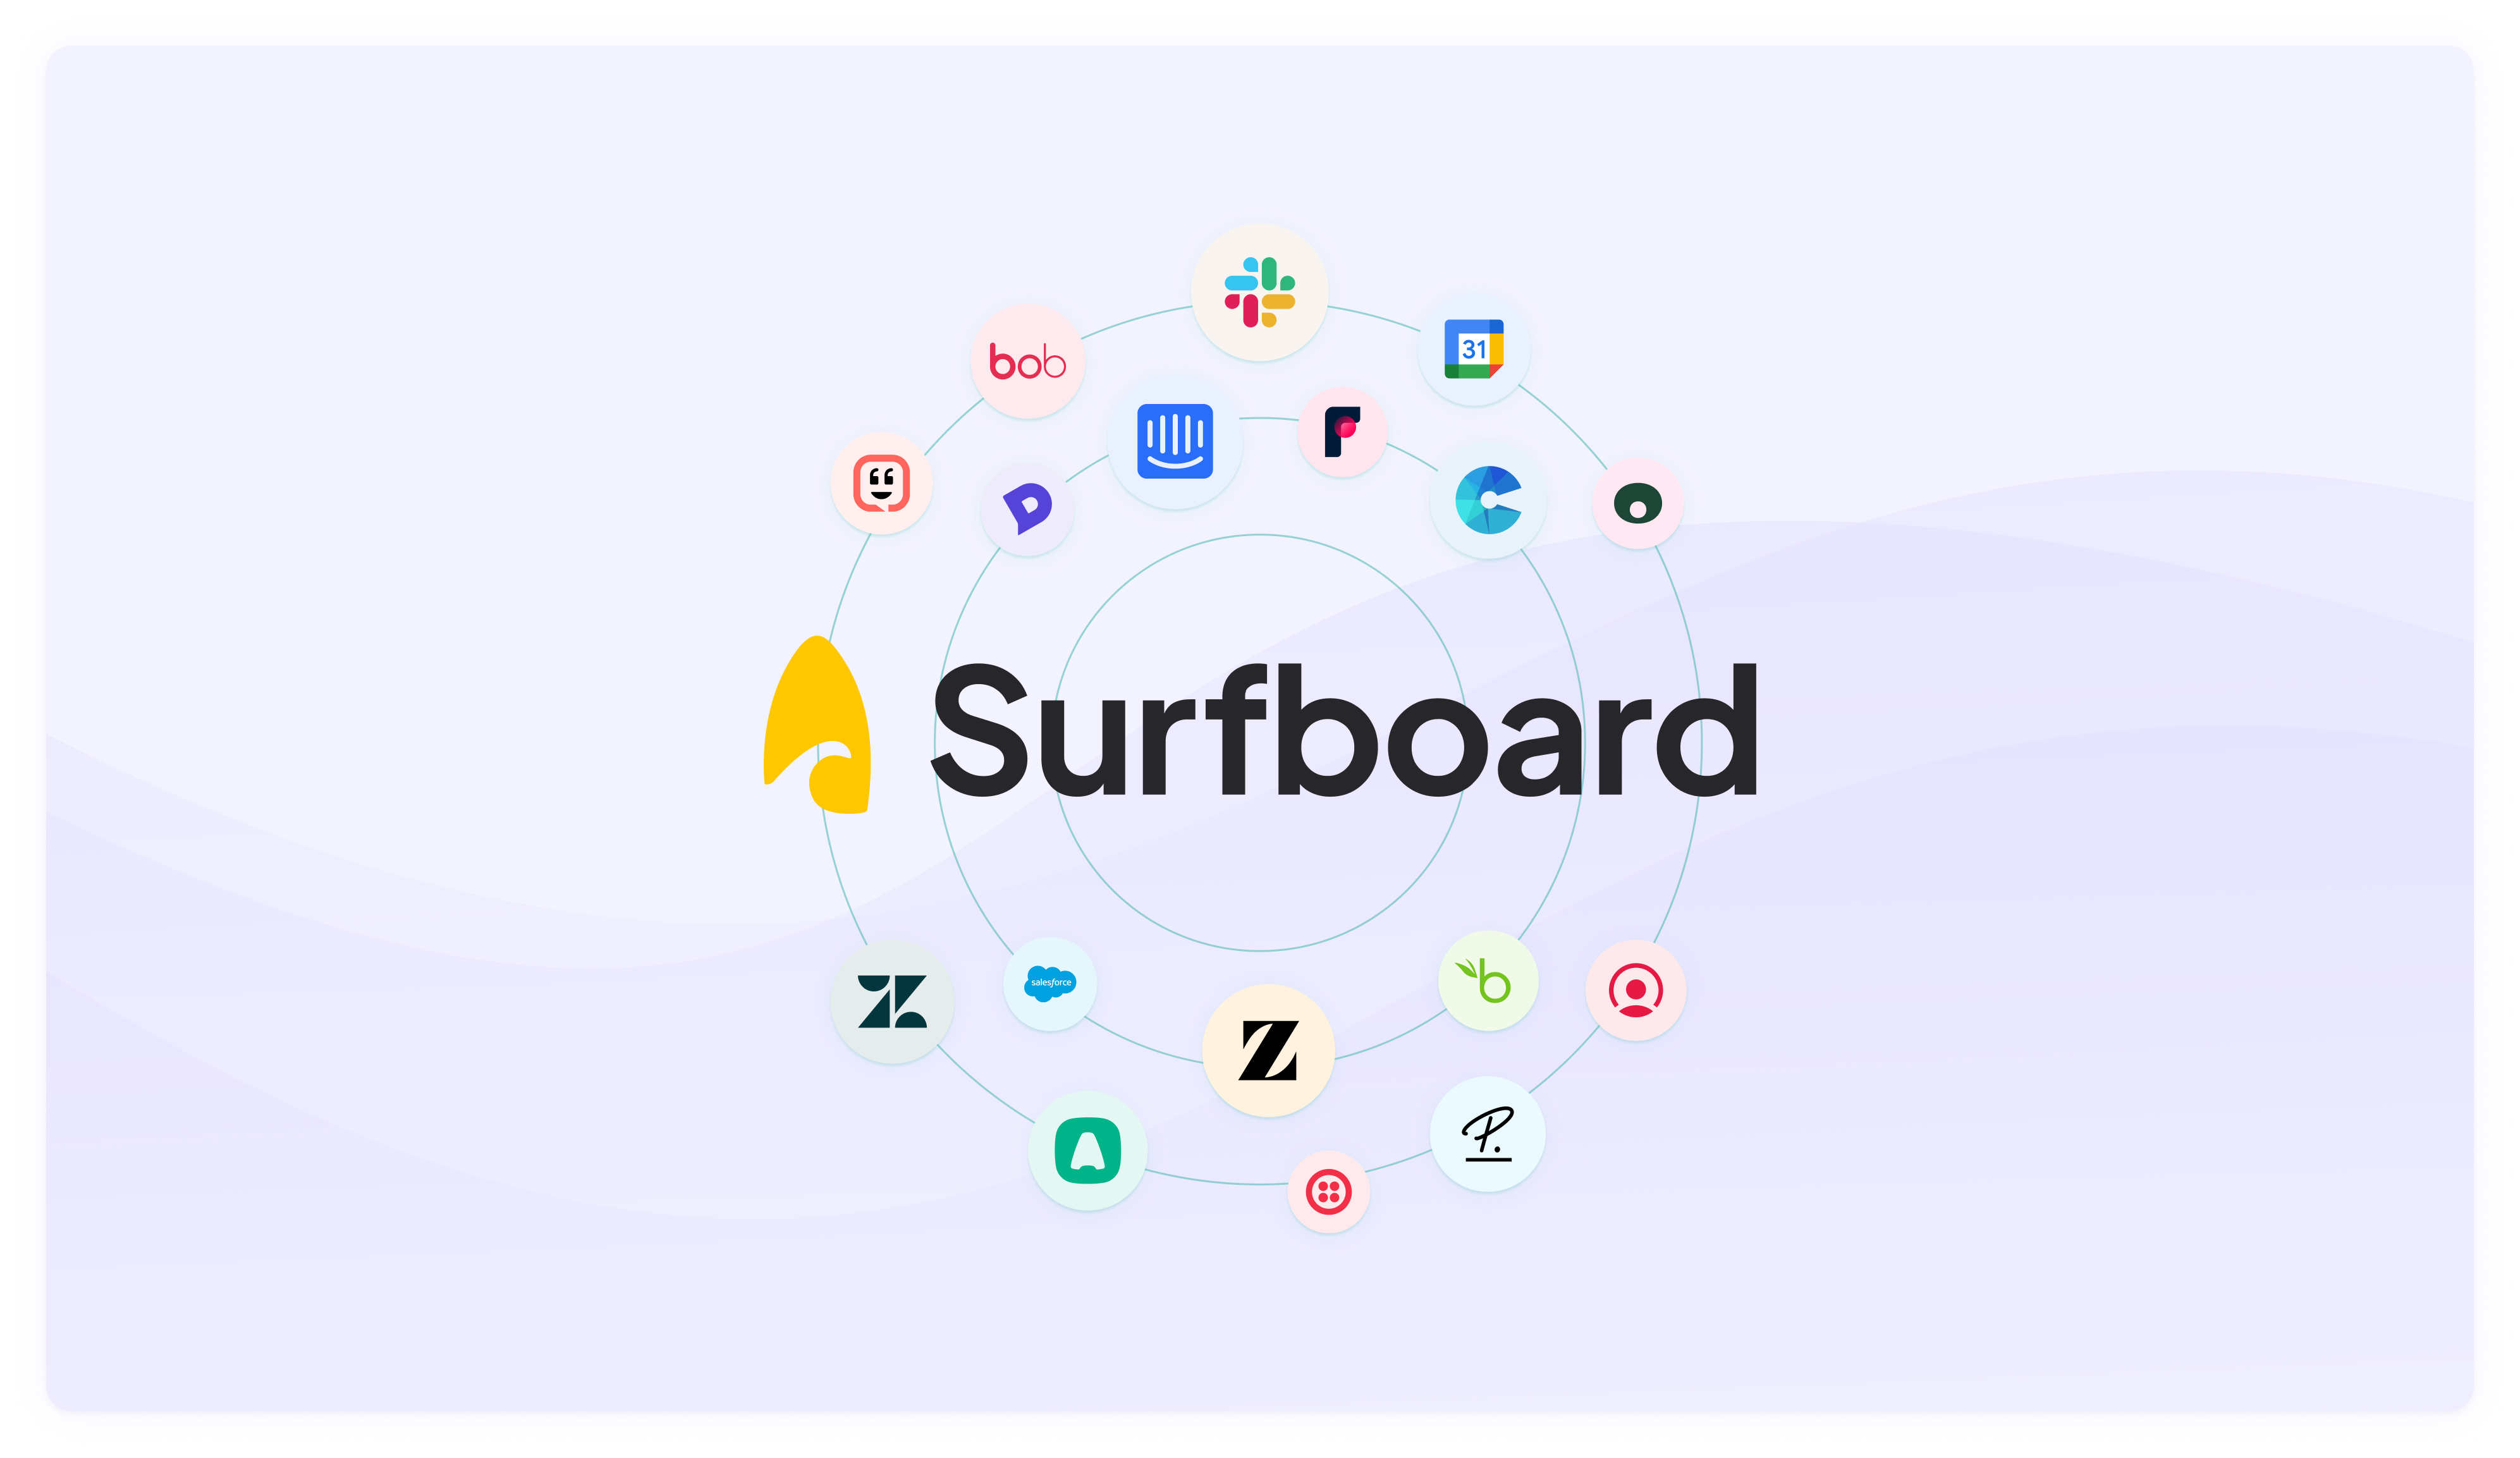 Surfboard Software - You don’t need any support from engineering to get started with Surfboard.  Surfboard seamlessly connects with your existing systems like HRIS, payroll & billing, CRM, ticketing, and time off, making it the single source of truth for your support team.